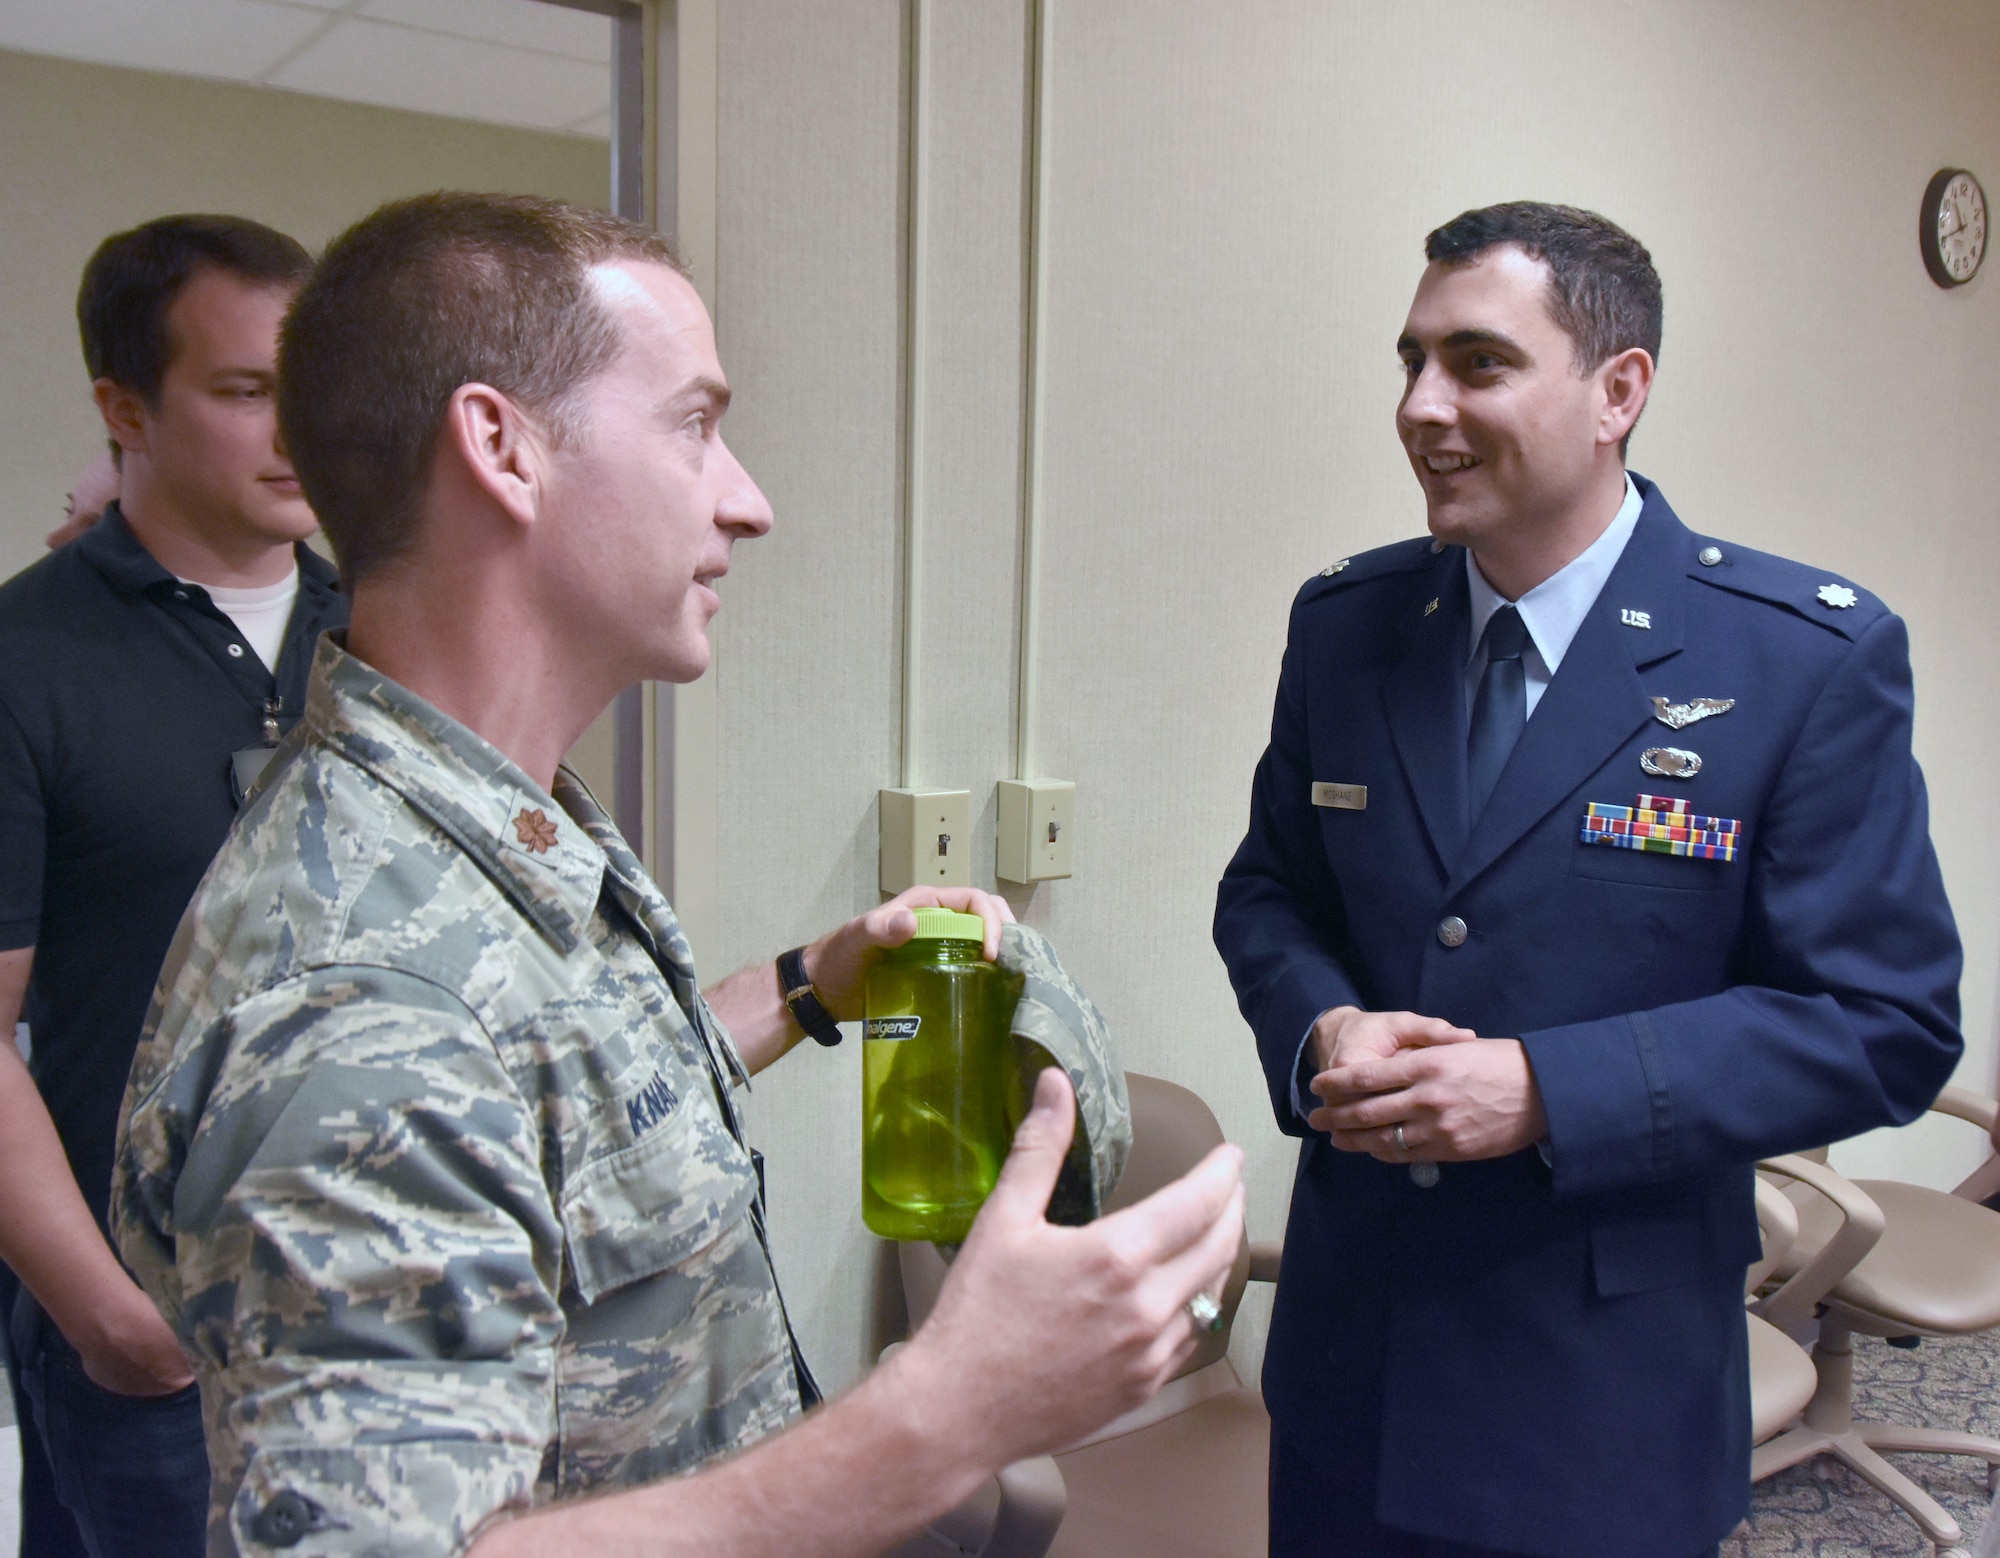 Following the Change of Leadership ceremony, AEDC Flight Systems Commander Lt. Col. John McShane, at right, is welcomed by Maj. Michael Knauf, AEDC Aeropropulsion Operations Officer, and other AEDC team members. (U.S. Air Force photo by Bradley Hicks) (This image has been altered by obscuring a badge for security purposes.)